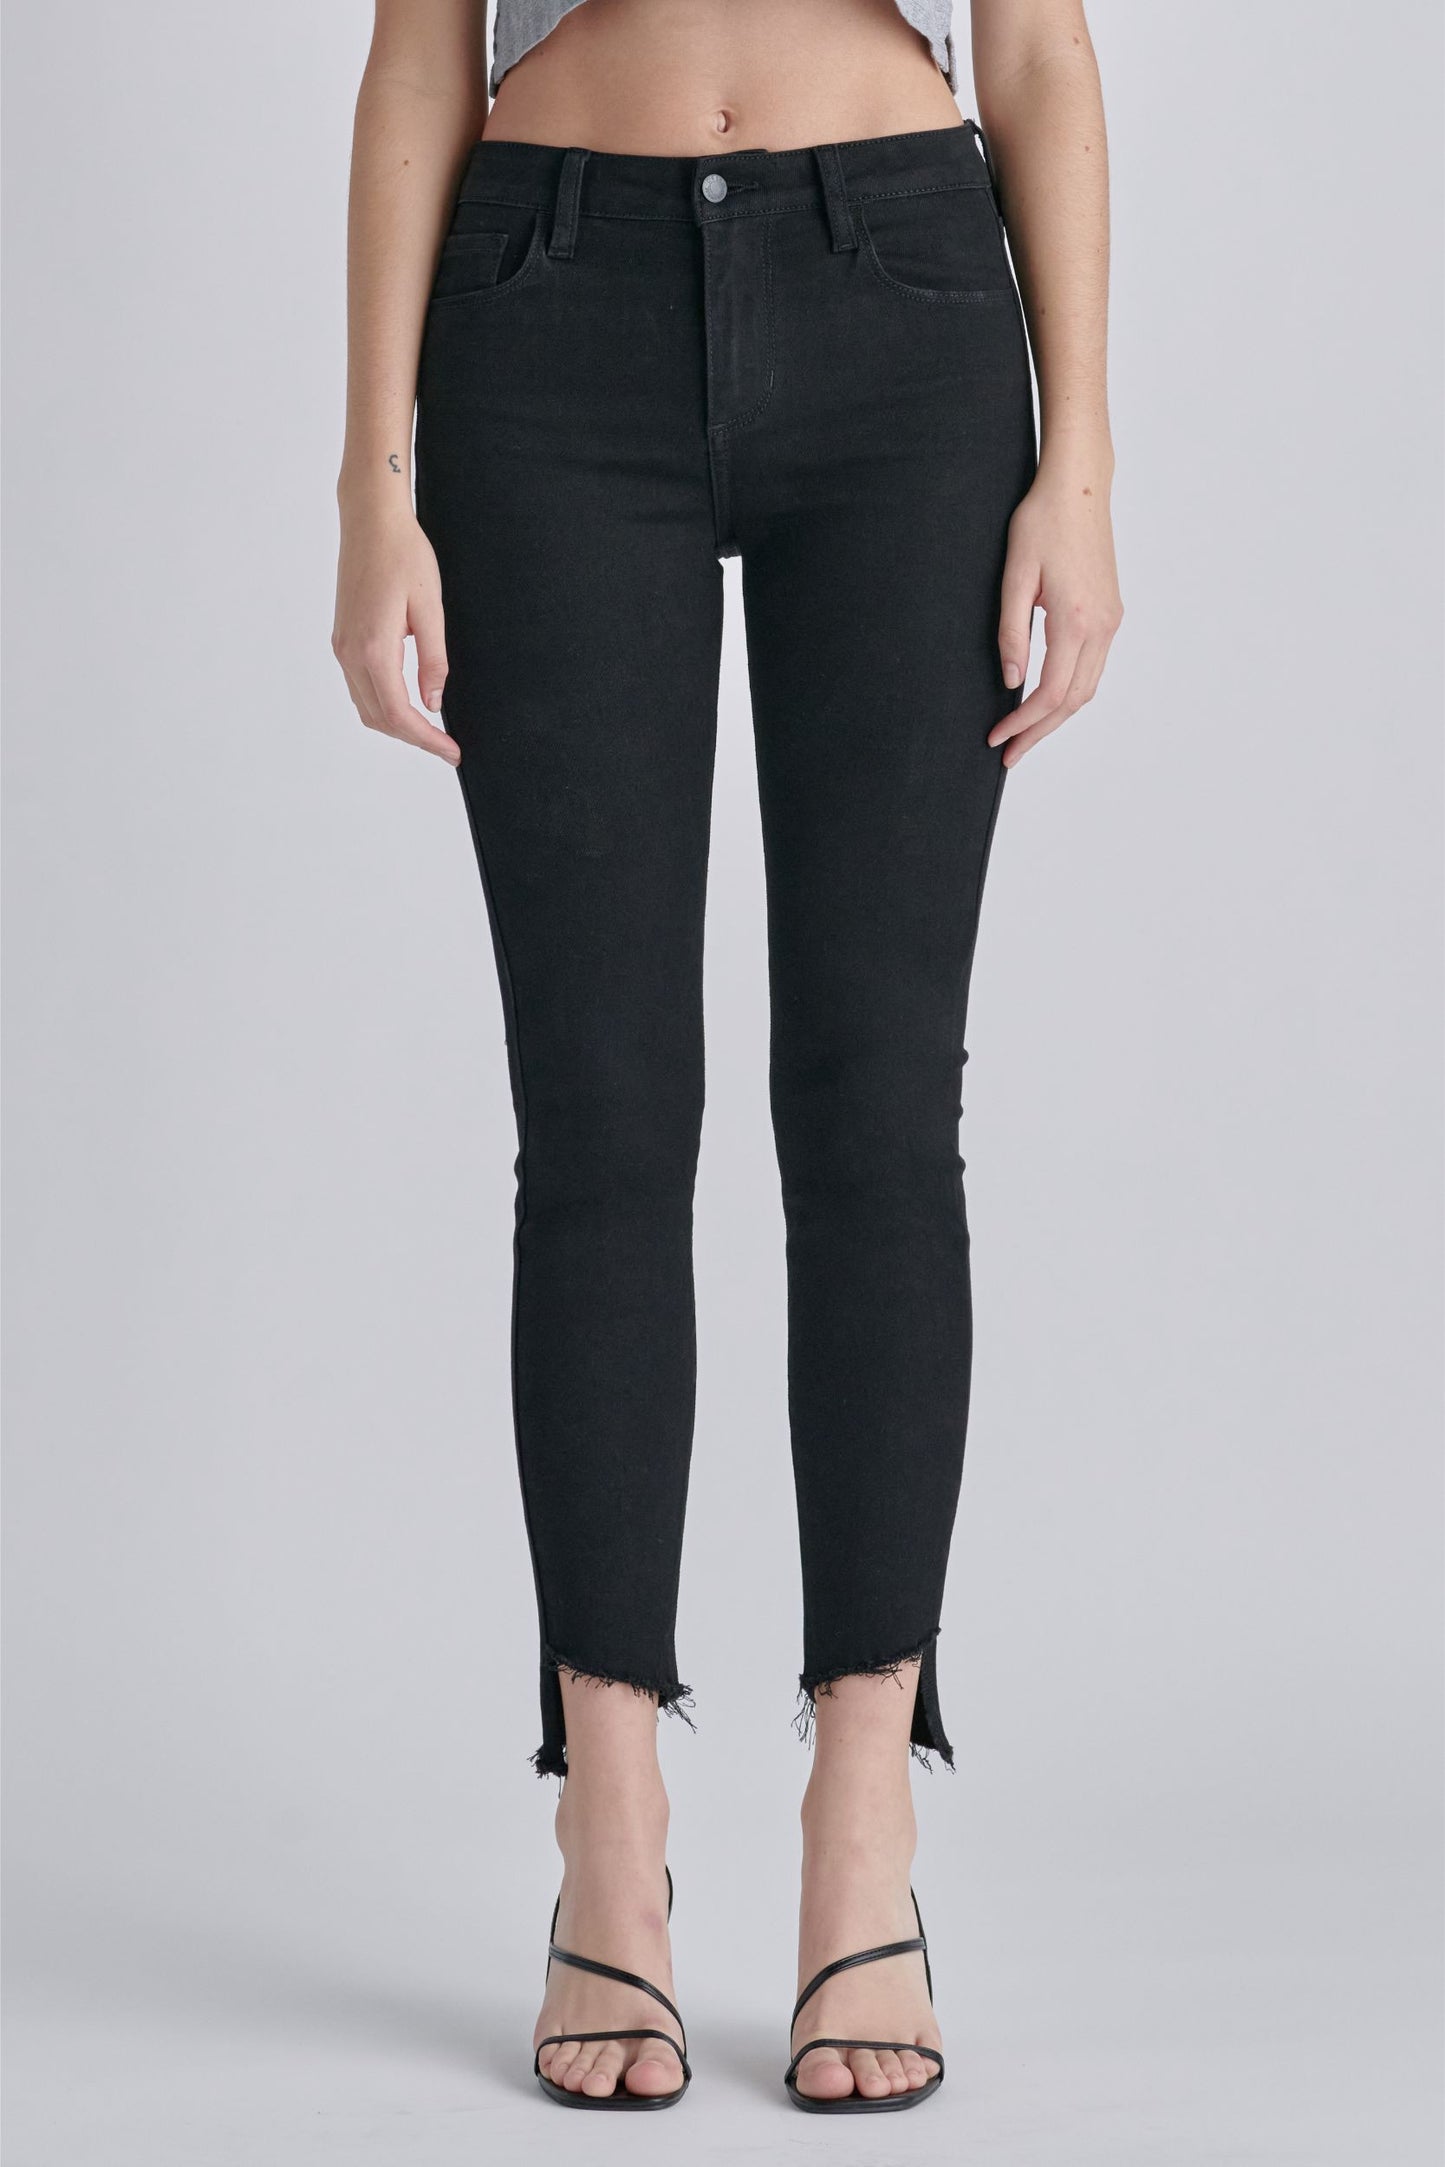 Mid Rise Crop Skinny with Uneven Frayed Hem - Southern Grace Creations